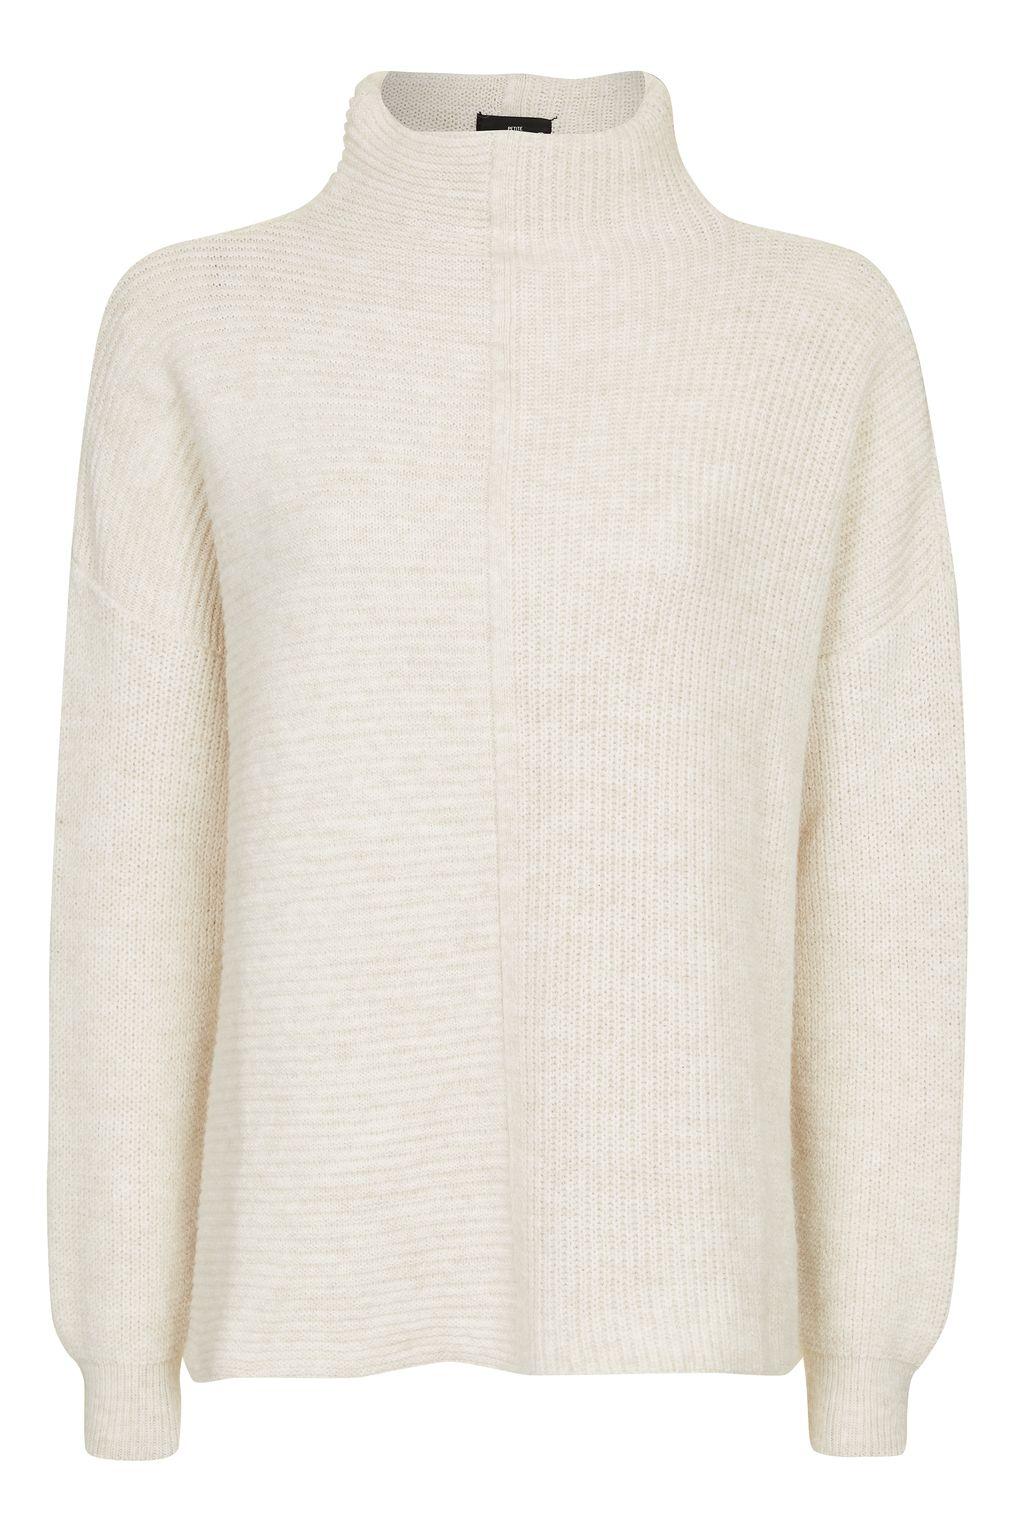 Lyst - Topshop Petite Variated Rib Knitted Jumper in White